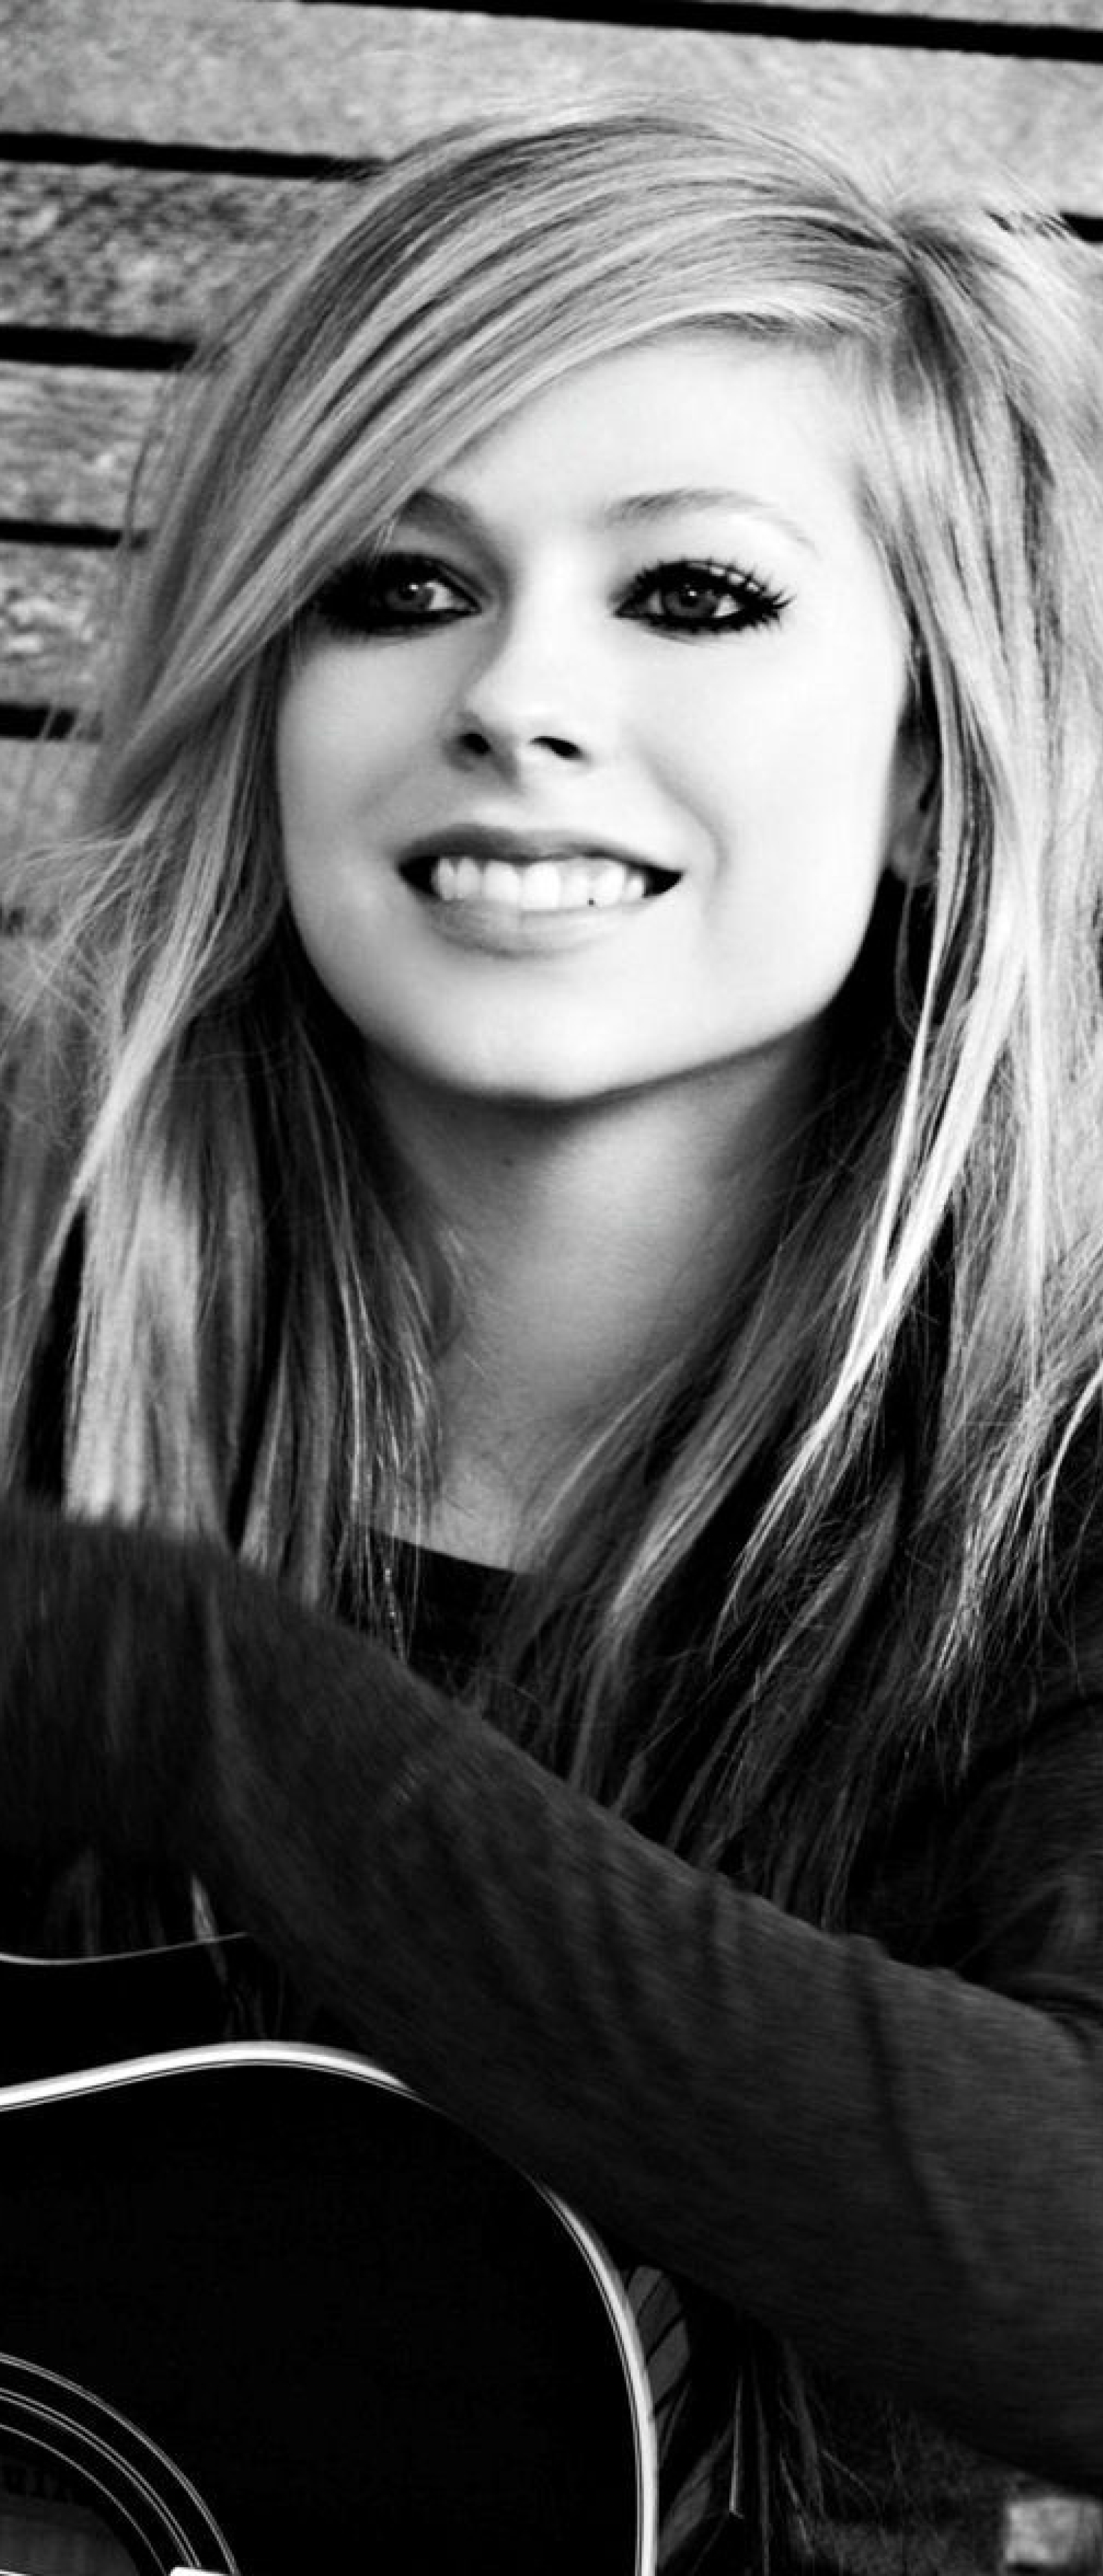 1644x3840 Avril Lavigne Hd Wallpapers 1644x3840 Resolution Wallpaper Hd Celebrities 4k Wallpapers Images Photos And Background Wallpapers Den